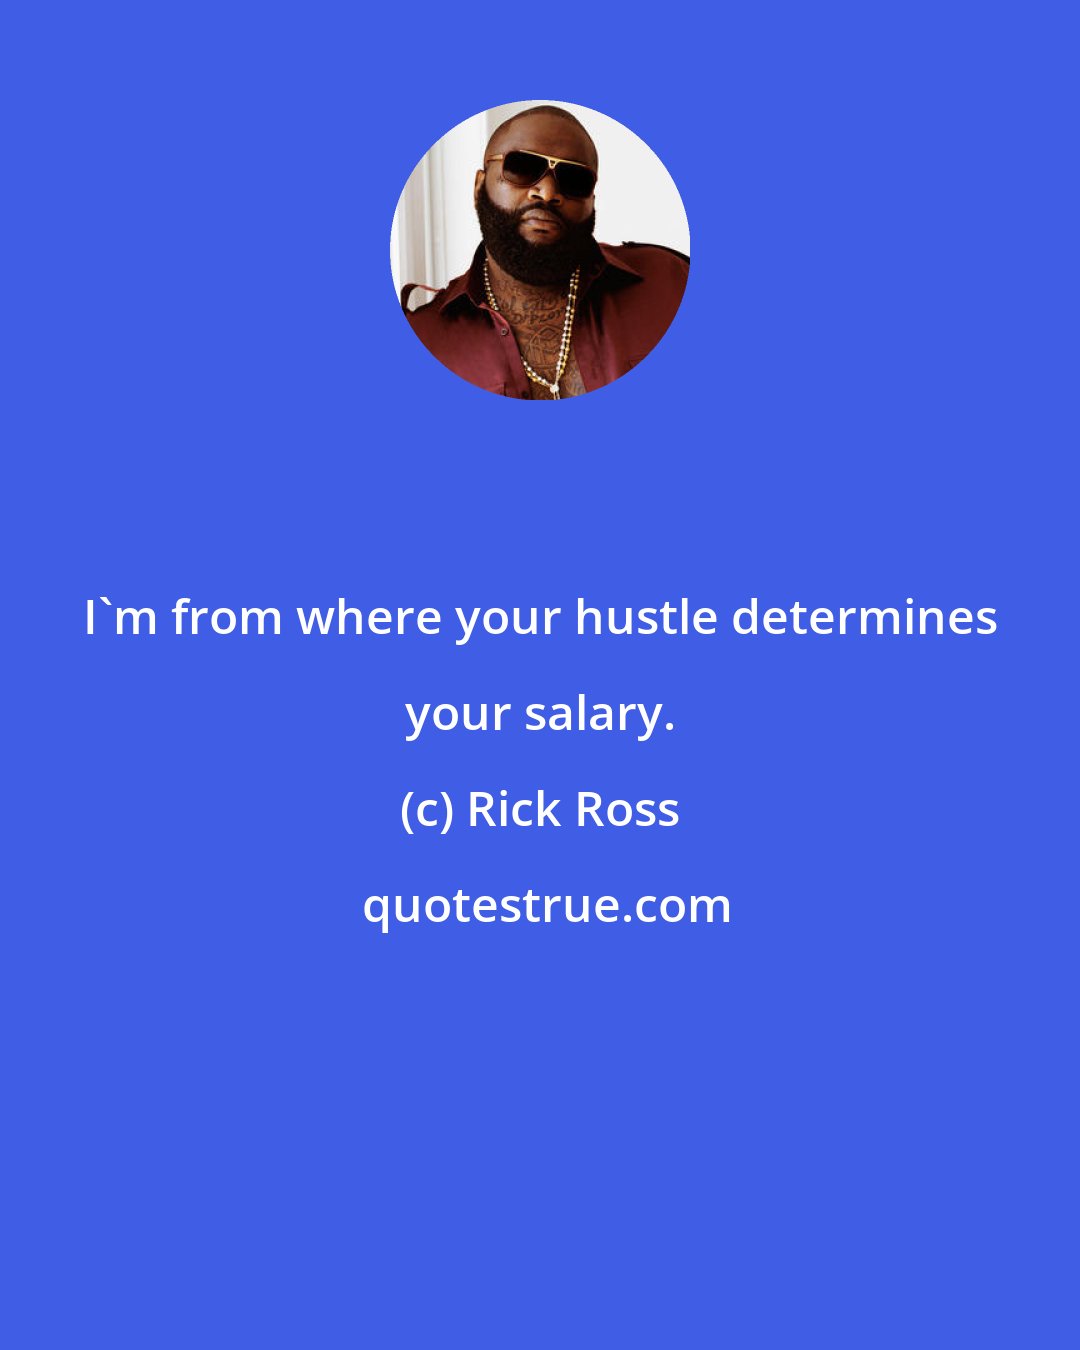 Rick Ross: I'm from where your hustle determines your salary.